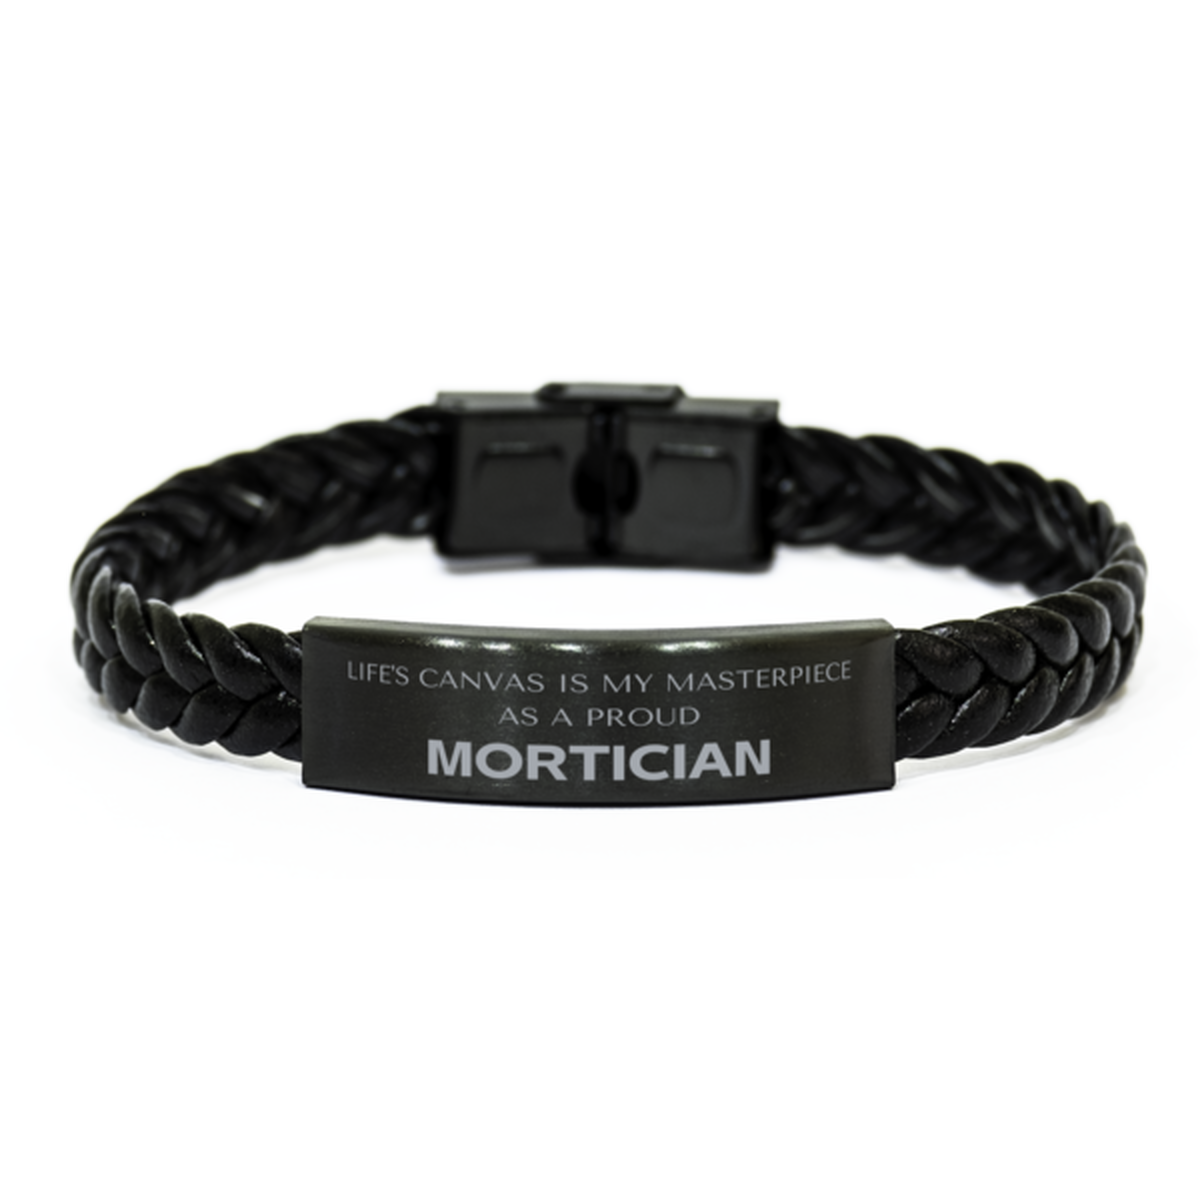 Proud Mortician Gifts, Life's canvas is my masterpiece, Epic Birthday Christmas Unique Braided Leather Bracelet For Mortician, Coworkers, Men, Women, Friends